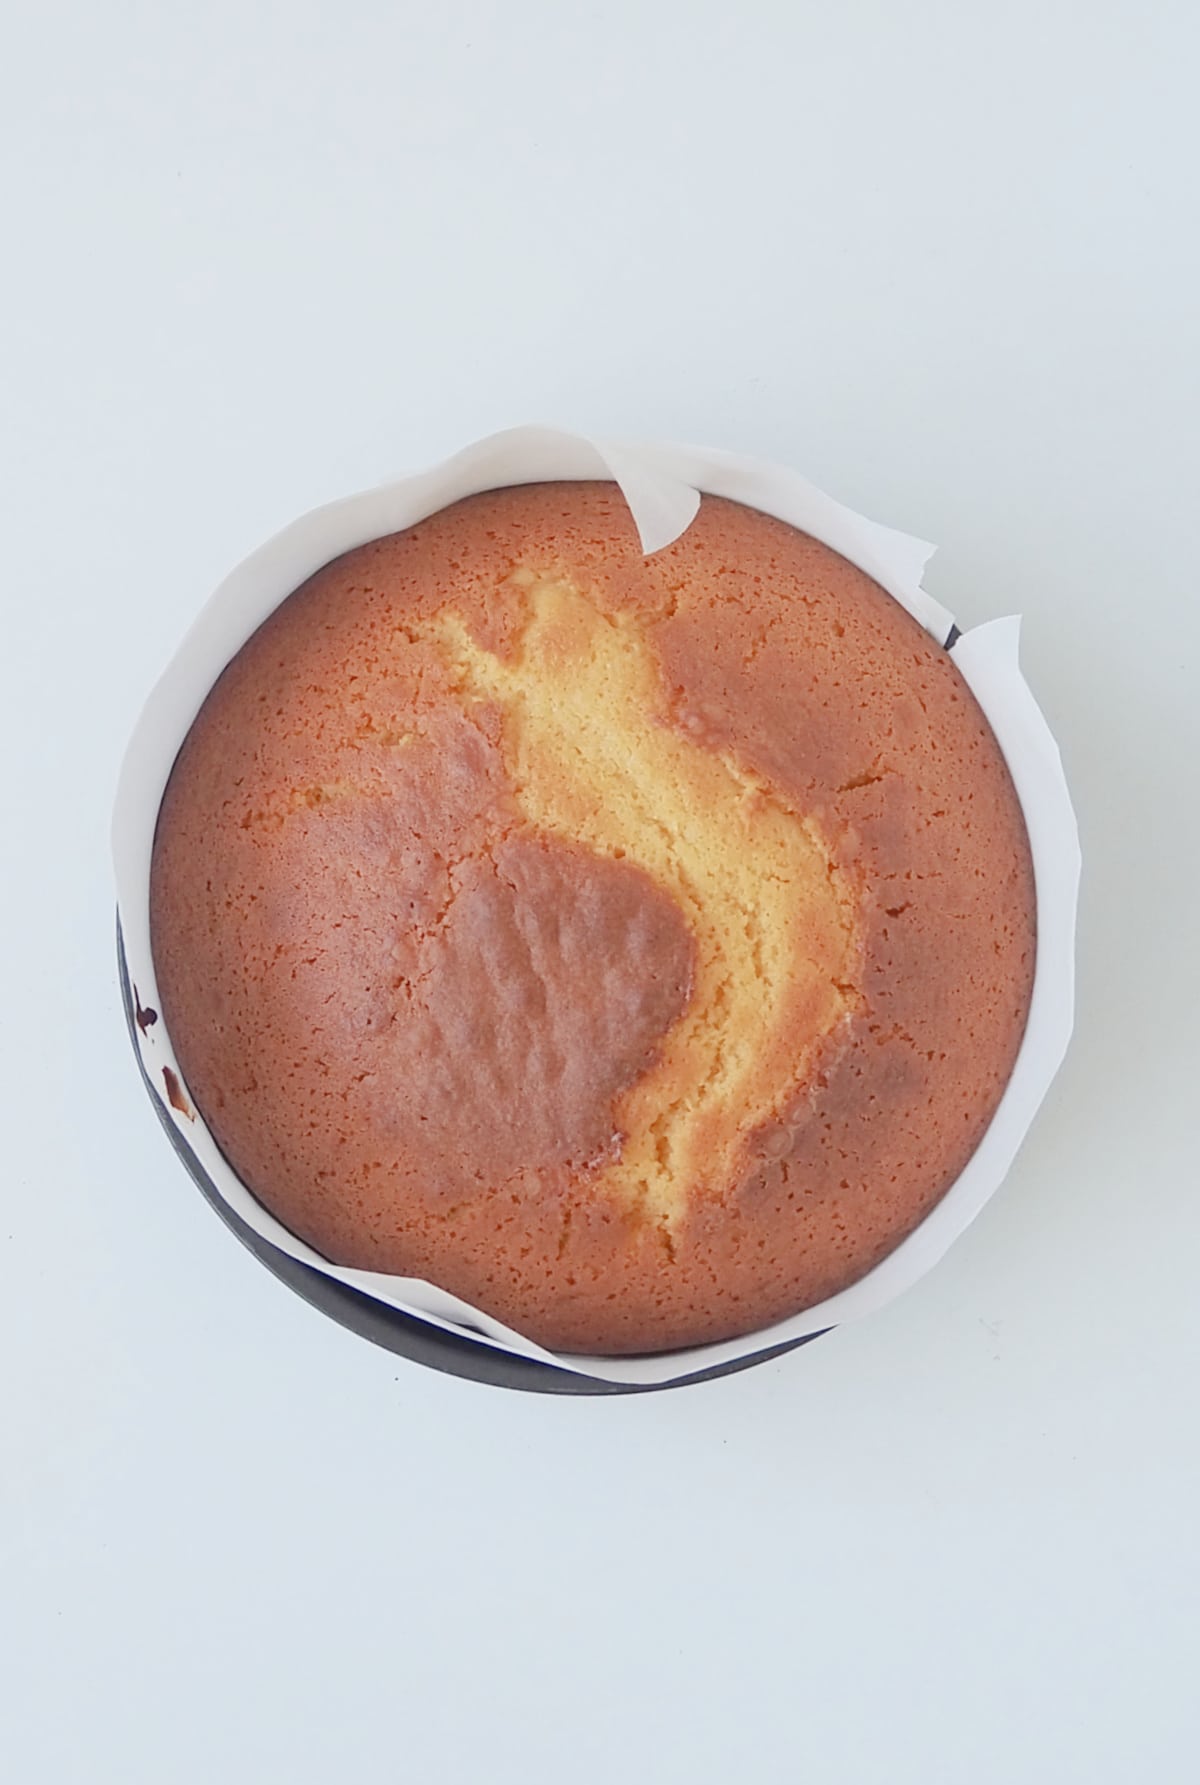 Overhead view of a custard cake straight from the oven.